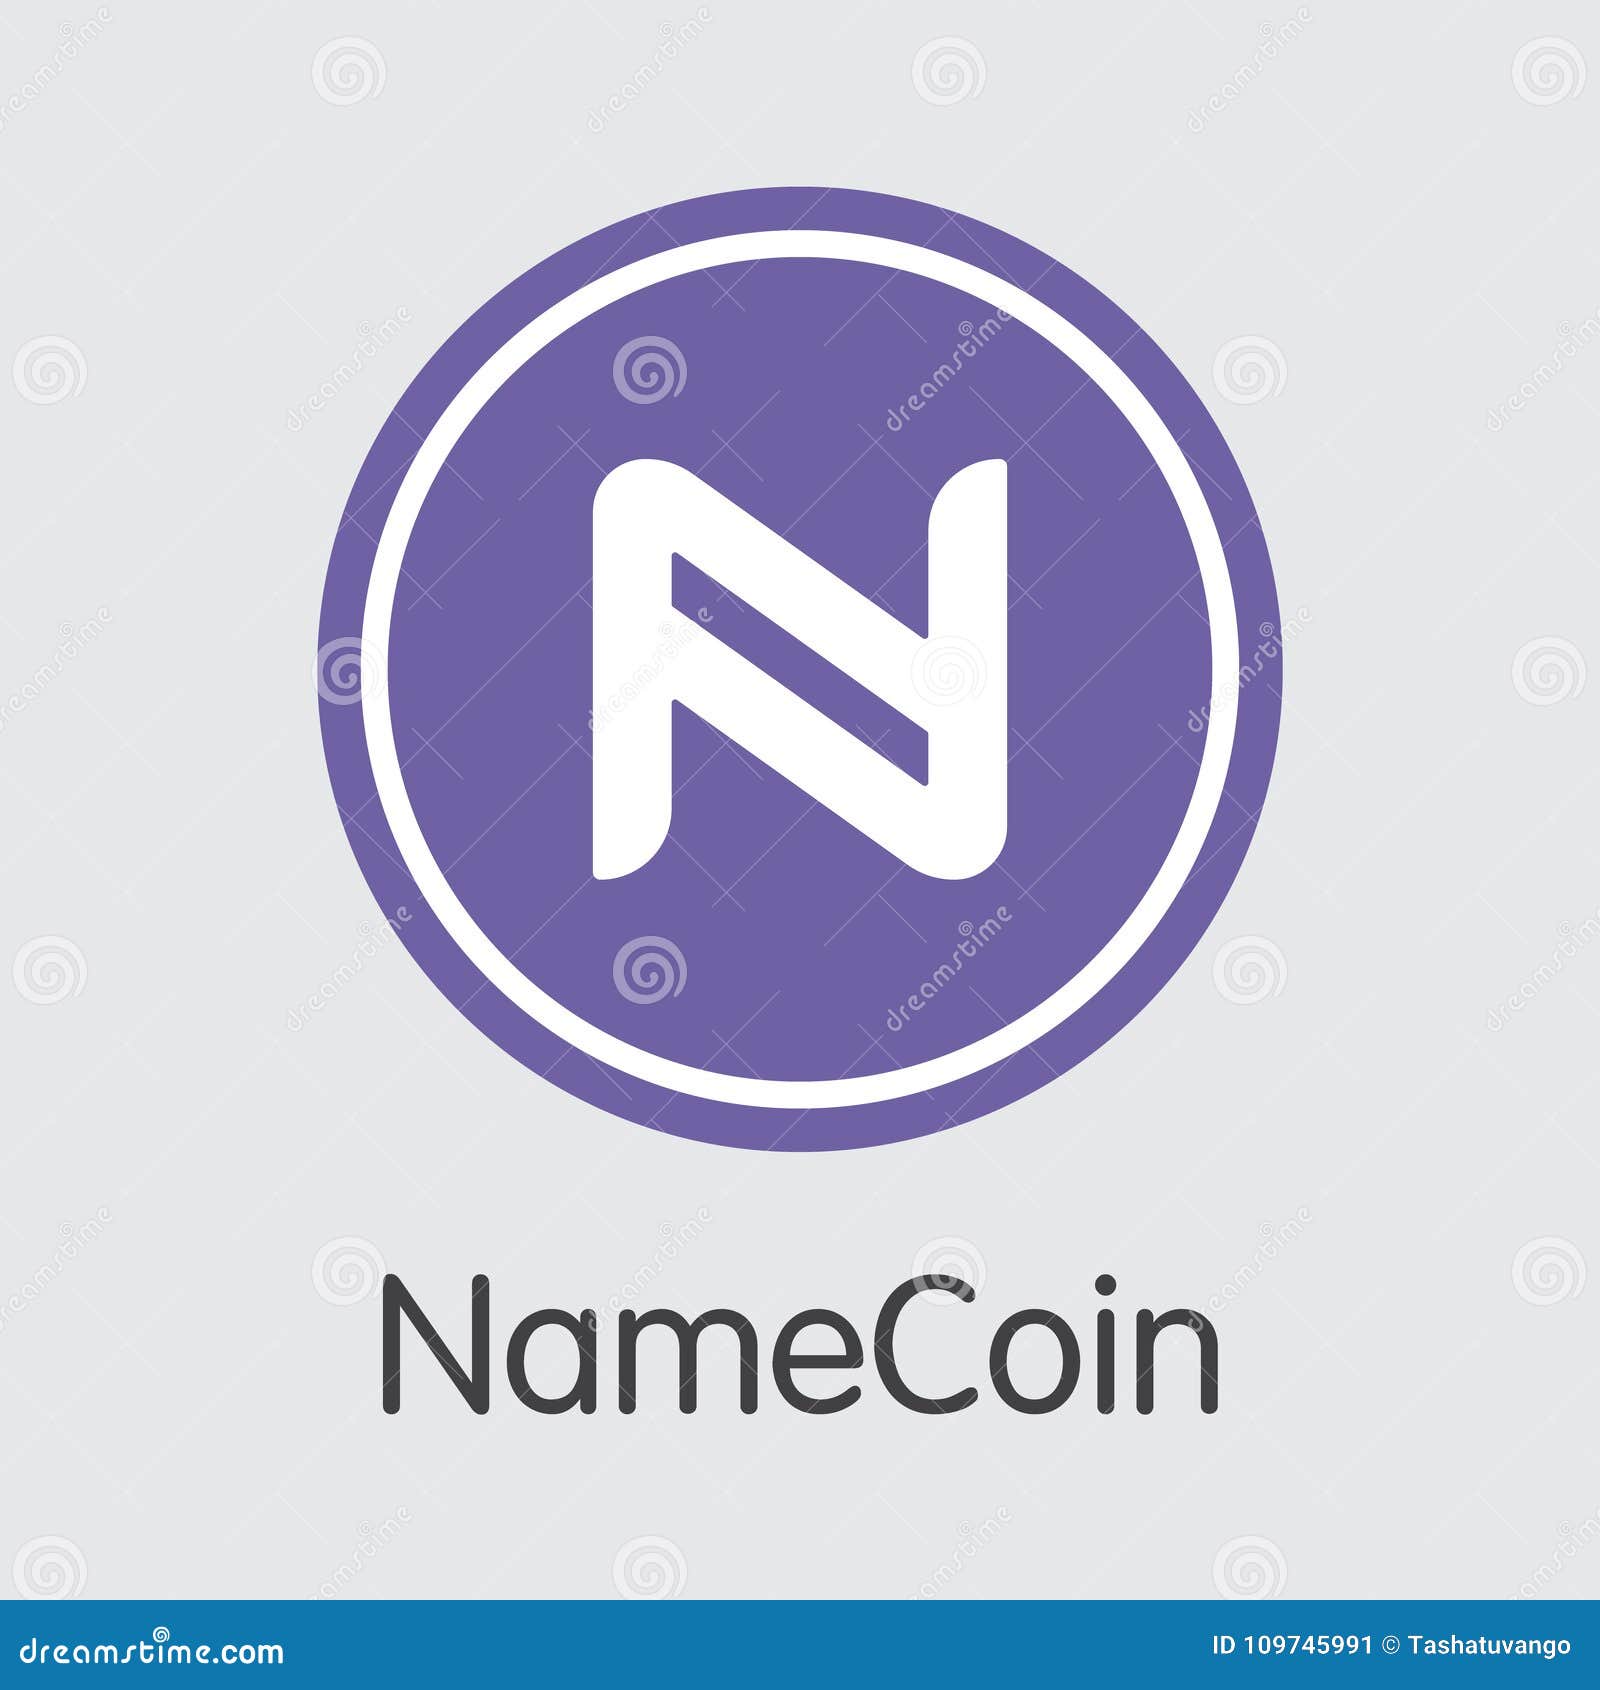 NMC Coin: what is Namecoin? Crypto token analysis and Overview | ecobt.ru